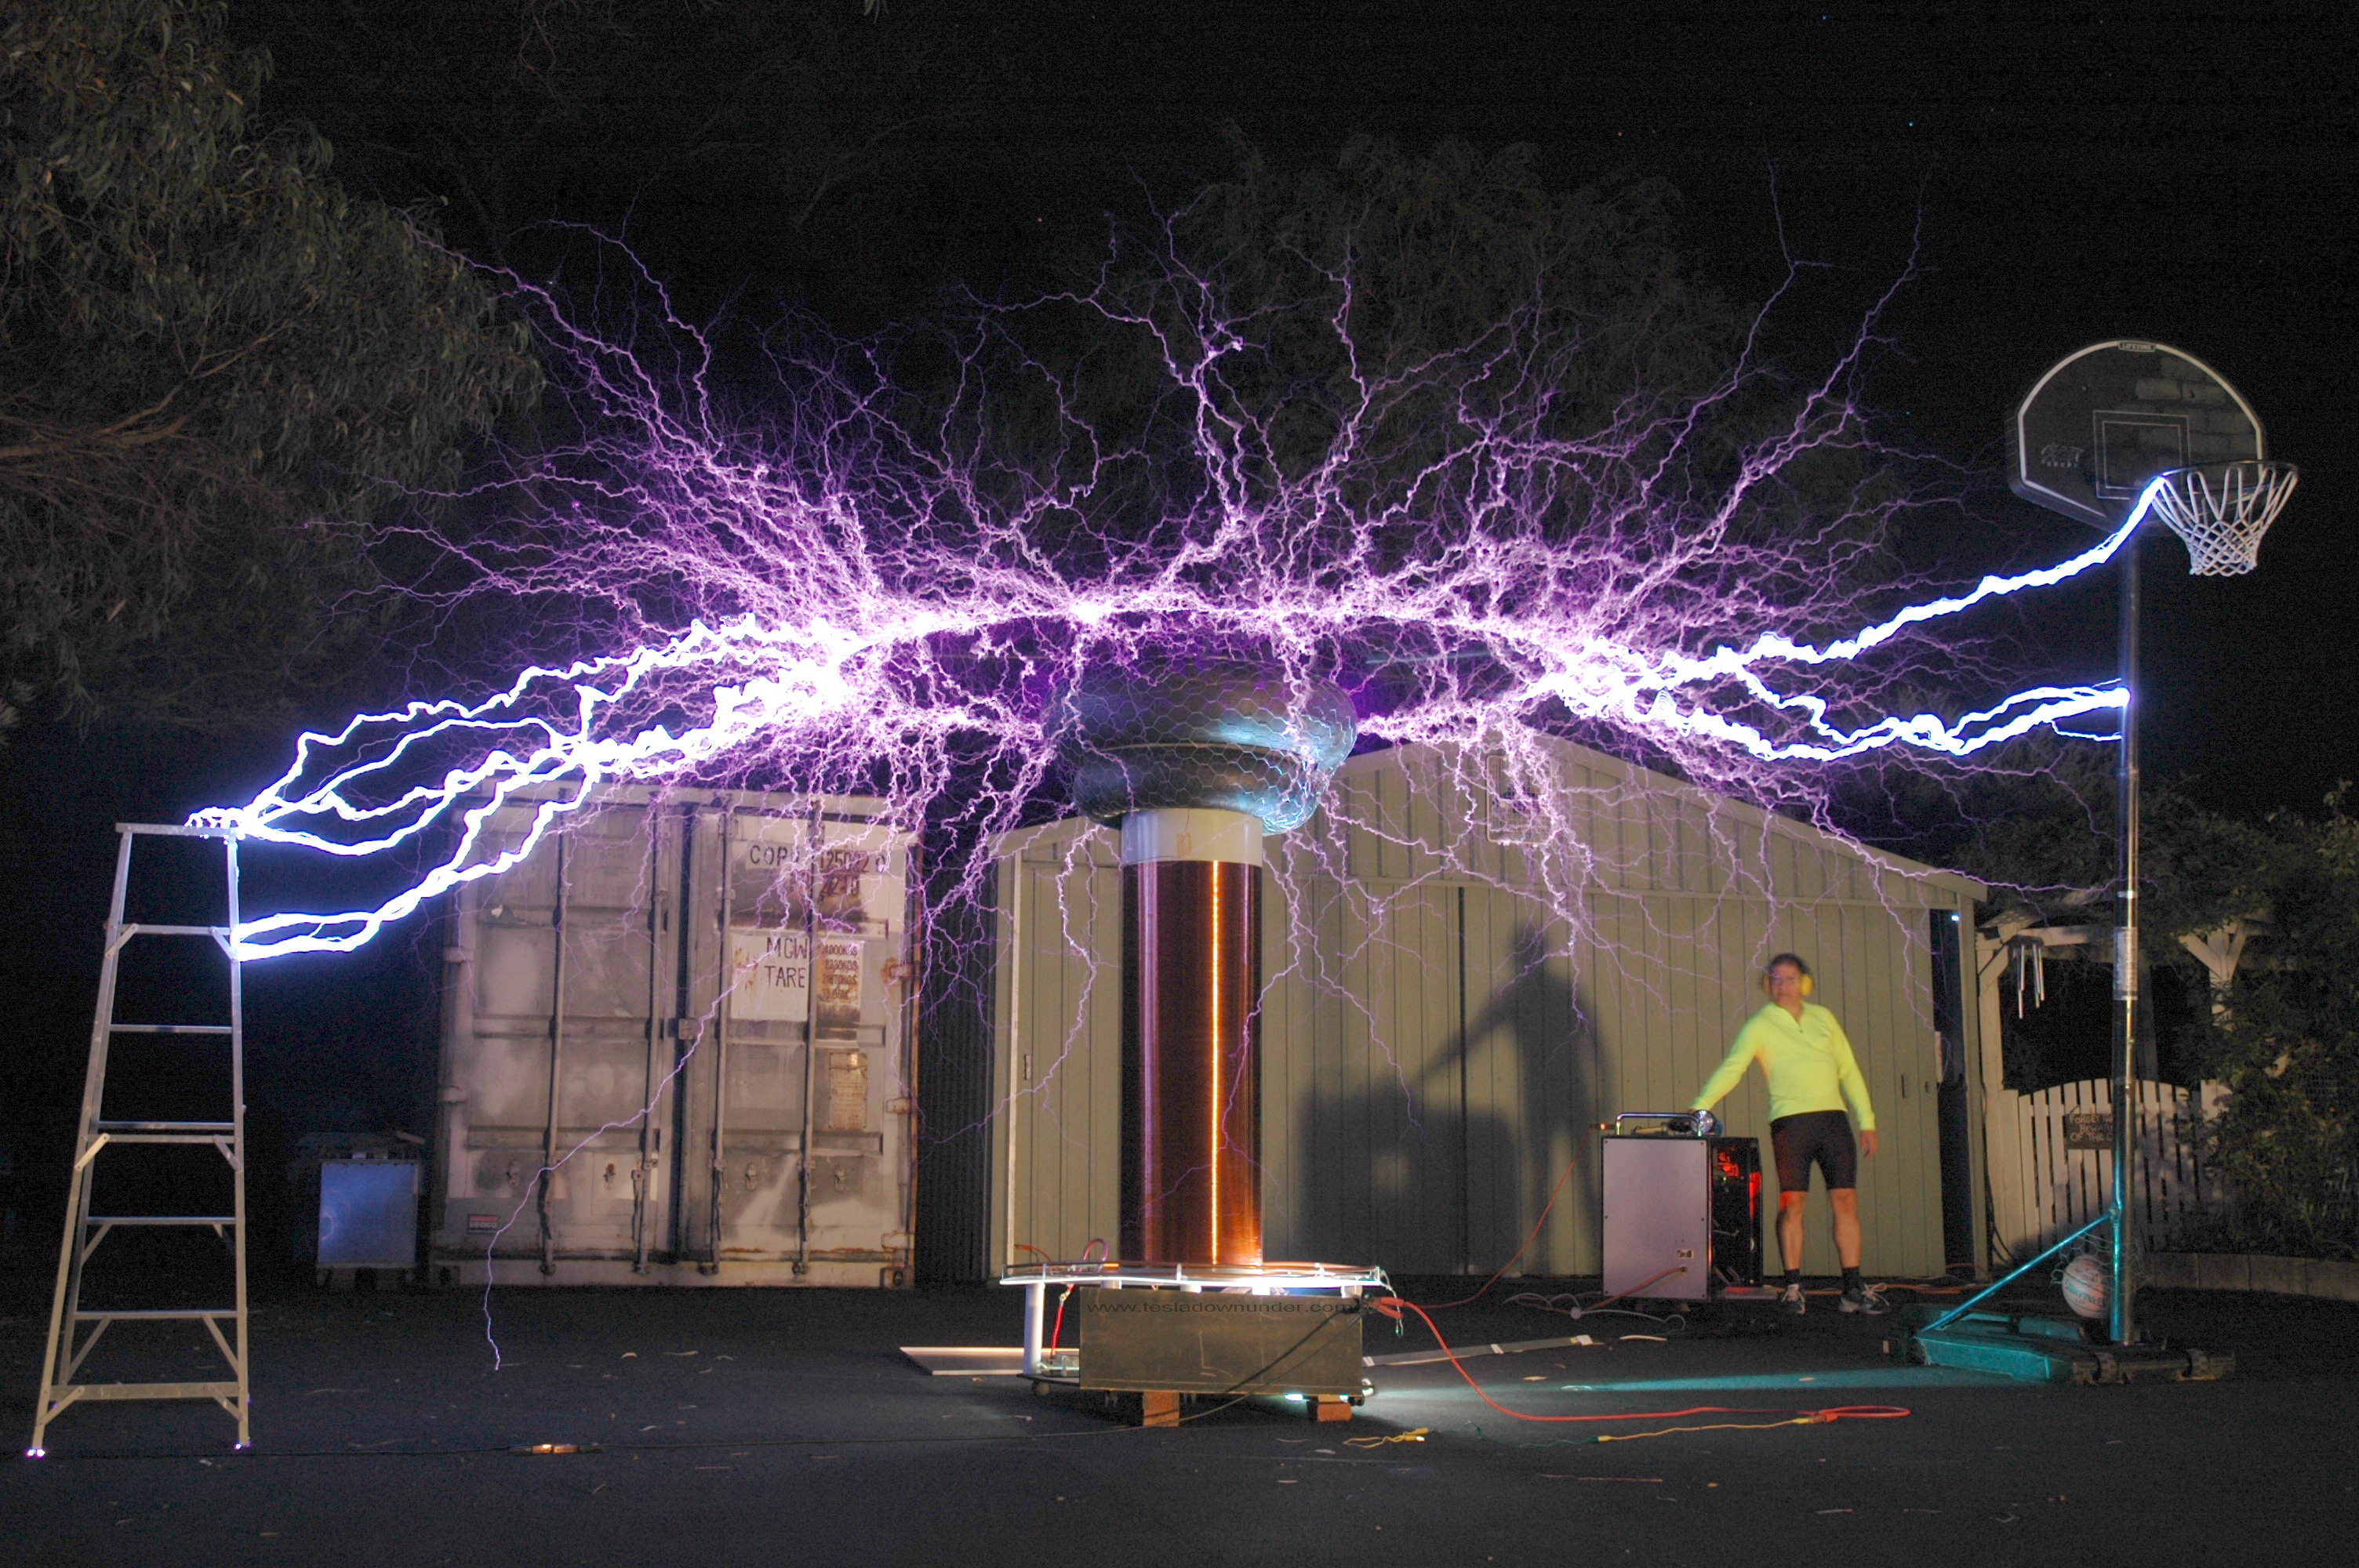 Tesla coil picture gallery - Richie s Tesla Coil Web Page